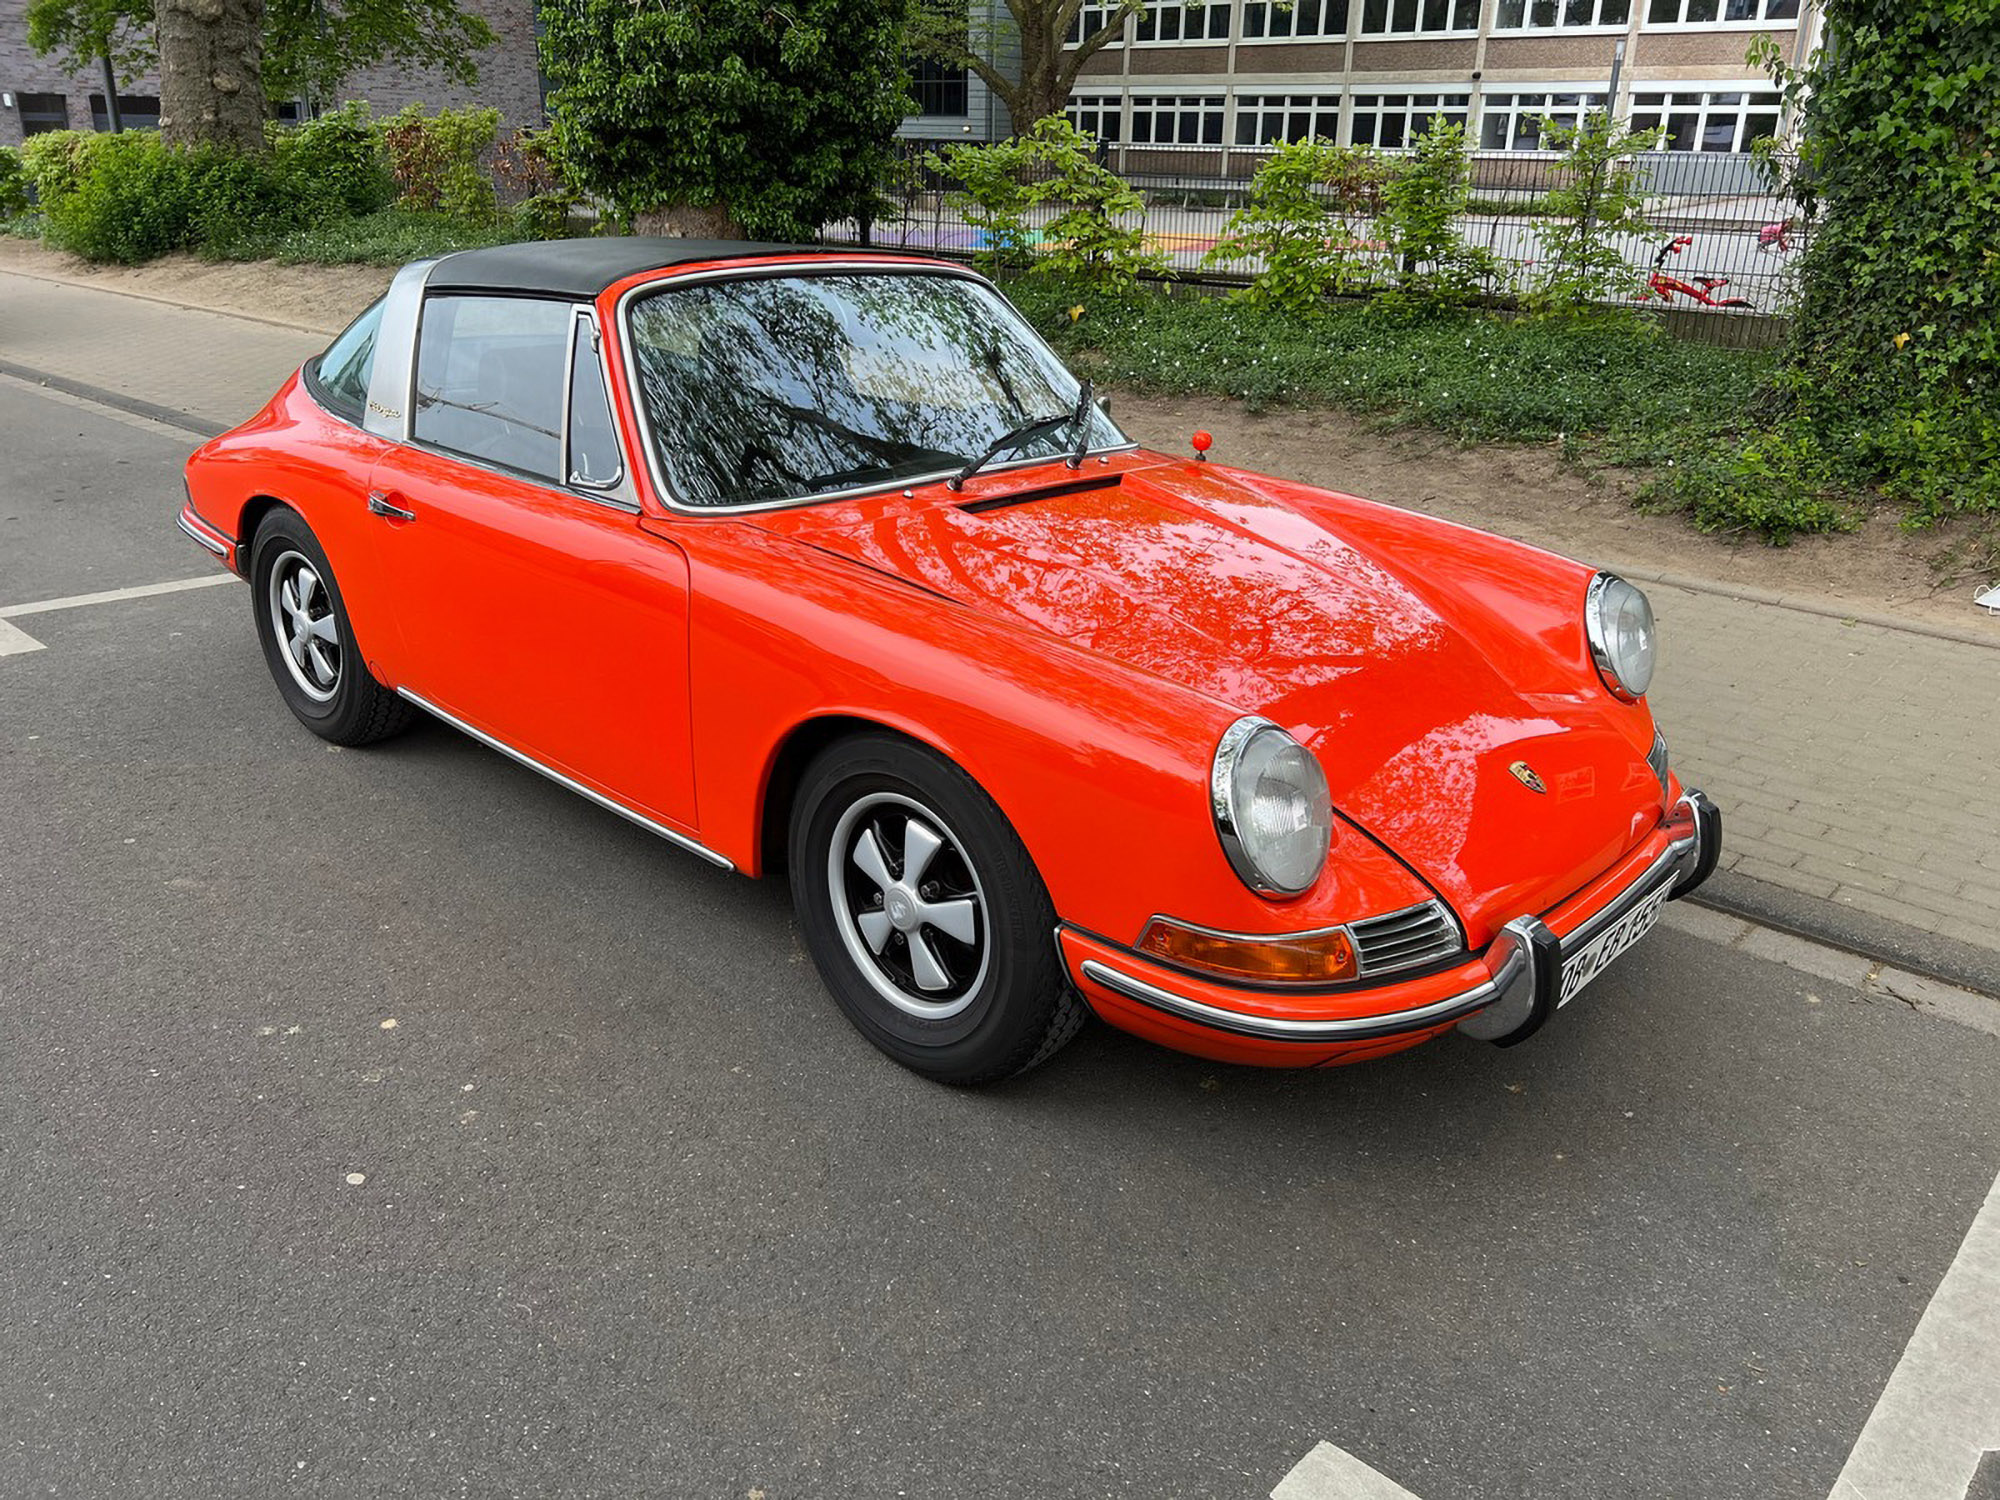 Read more about the article 1968 Luxury Porsche Worth GBP 85,000 Triggers International Search After Being Stolen From German Owner